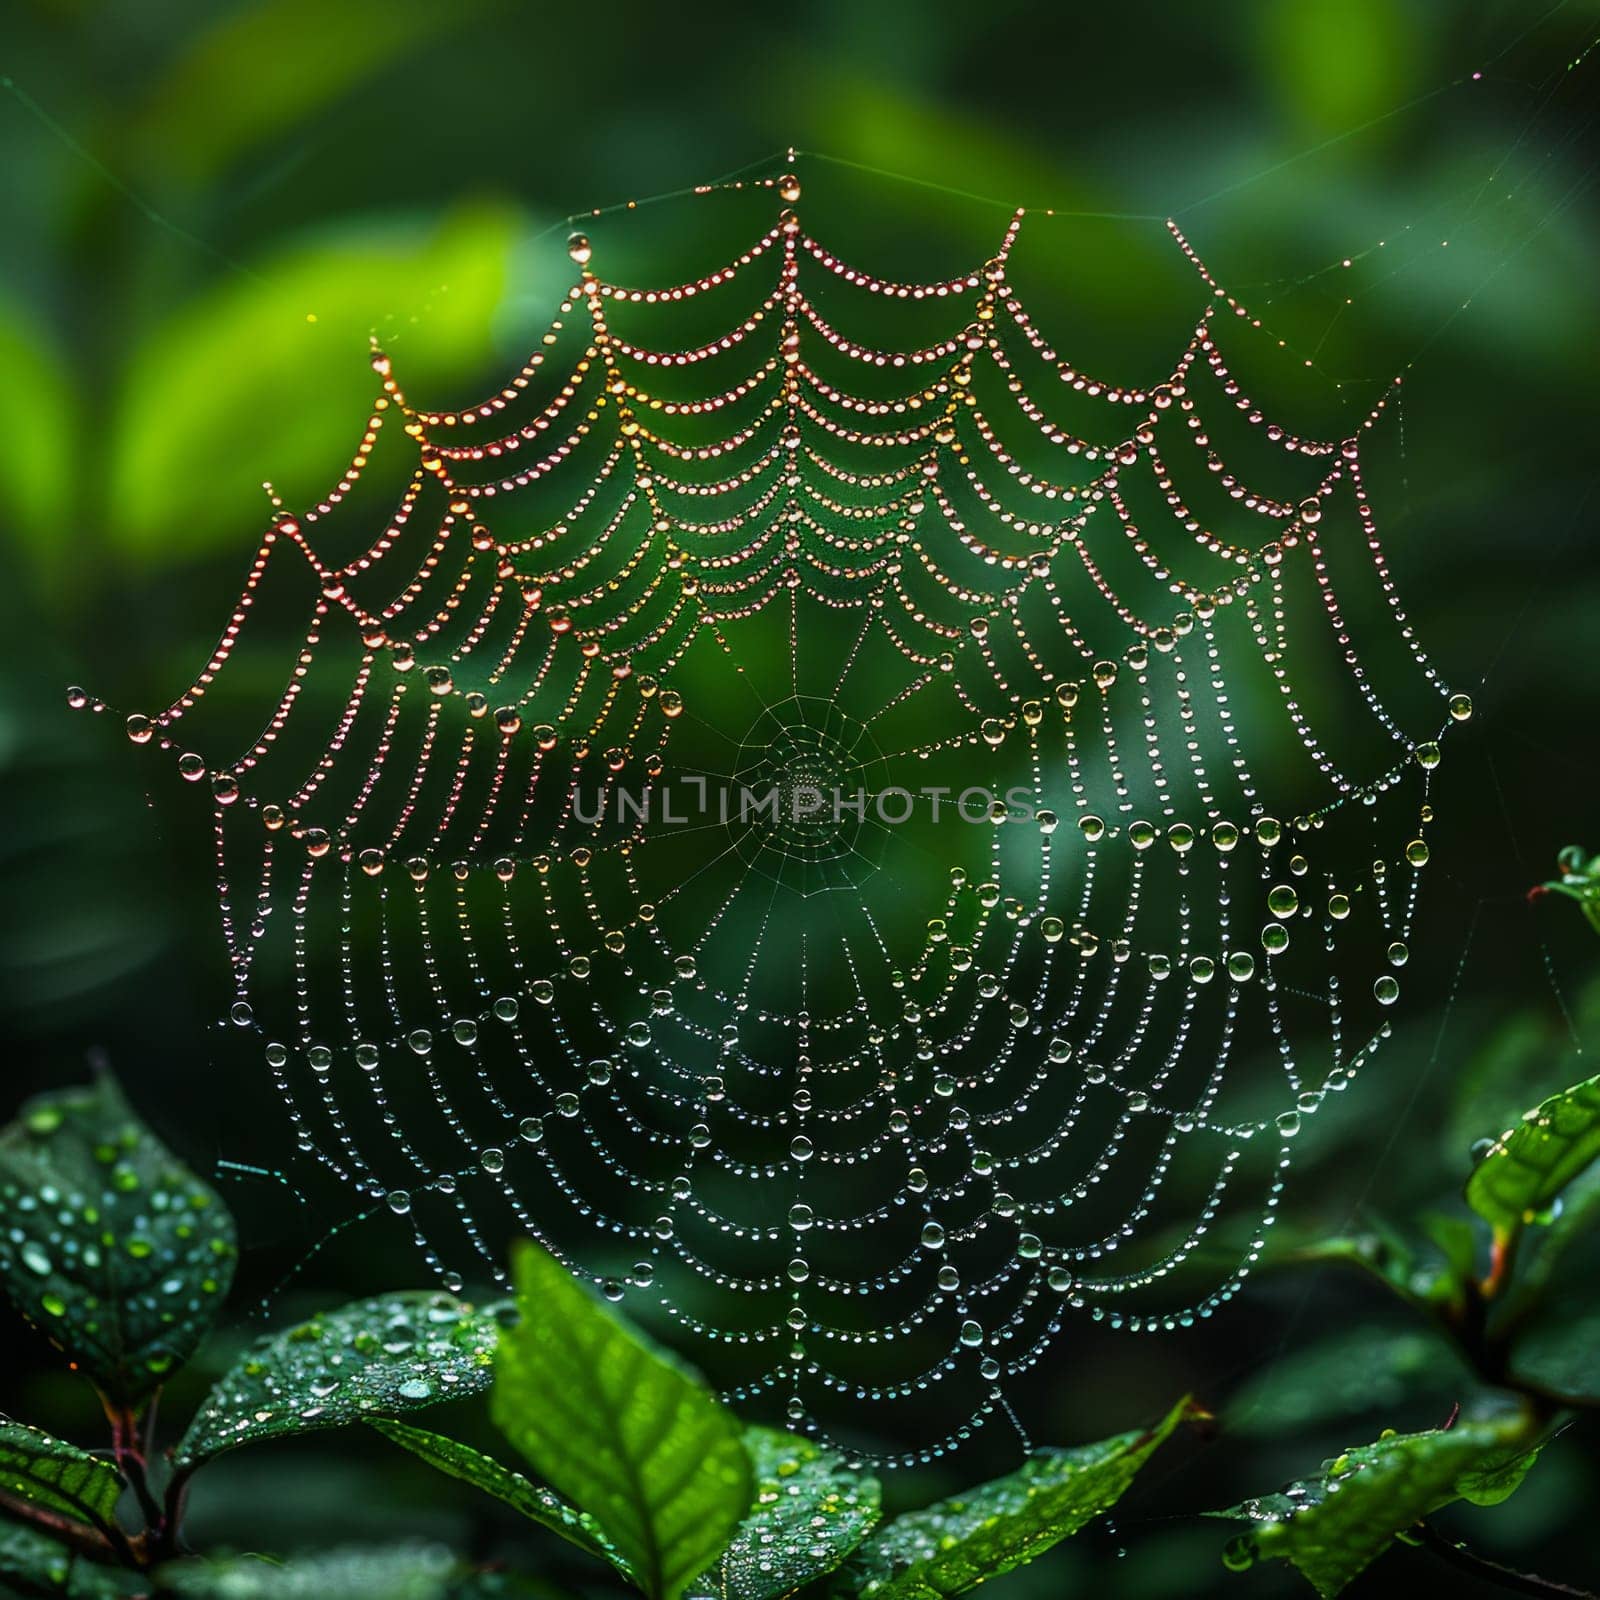 A close-up view of a delicate spider web intricately woven on a vibrant green leaf, showcasing the beauty and complexity of natures design by but_photo